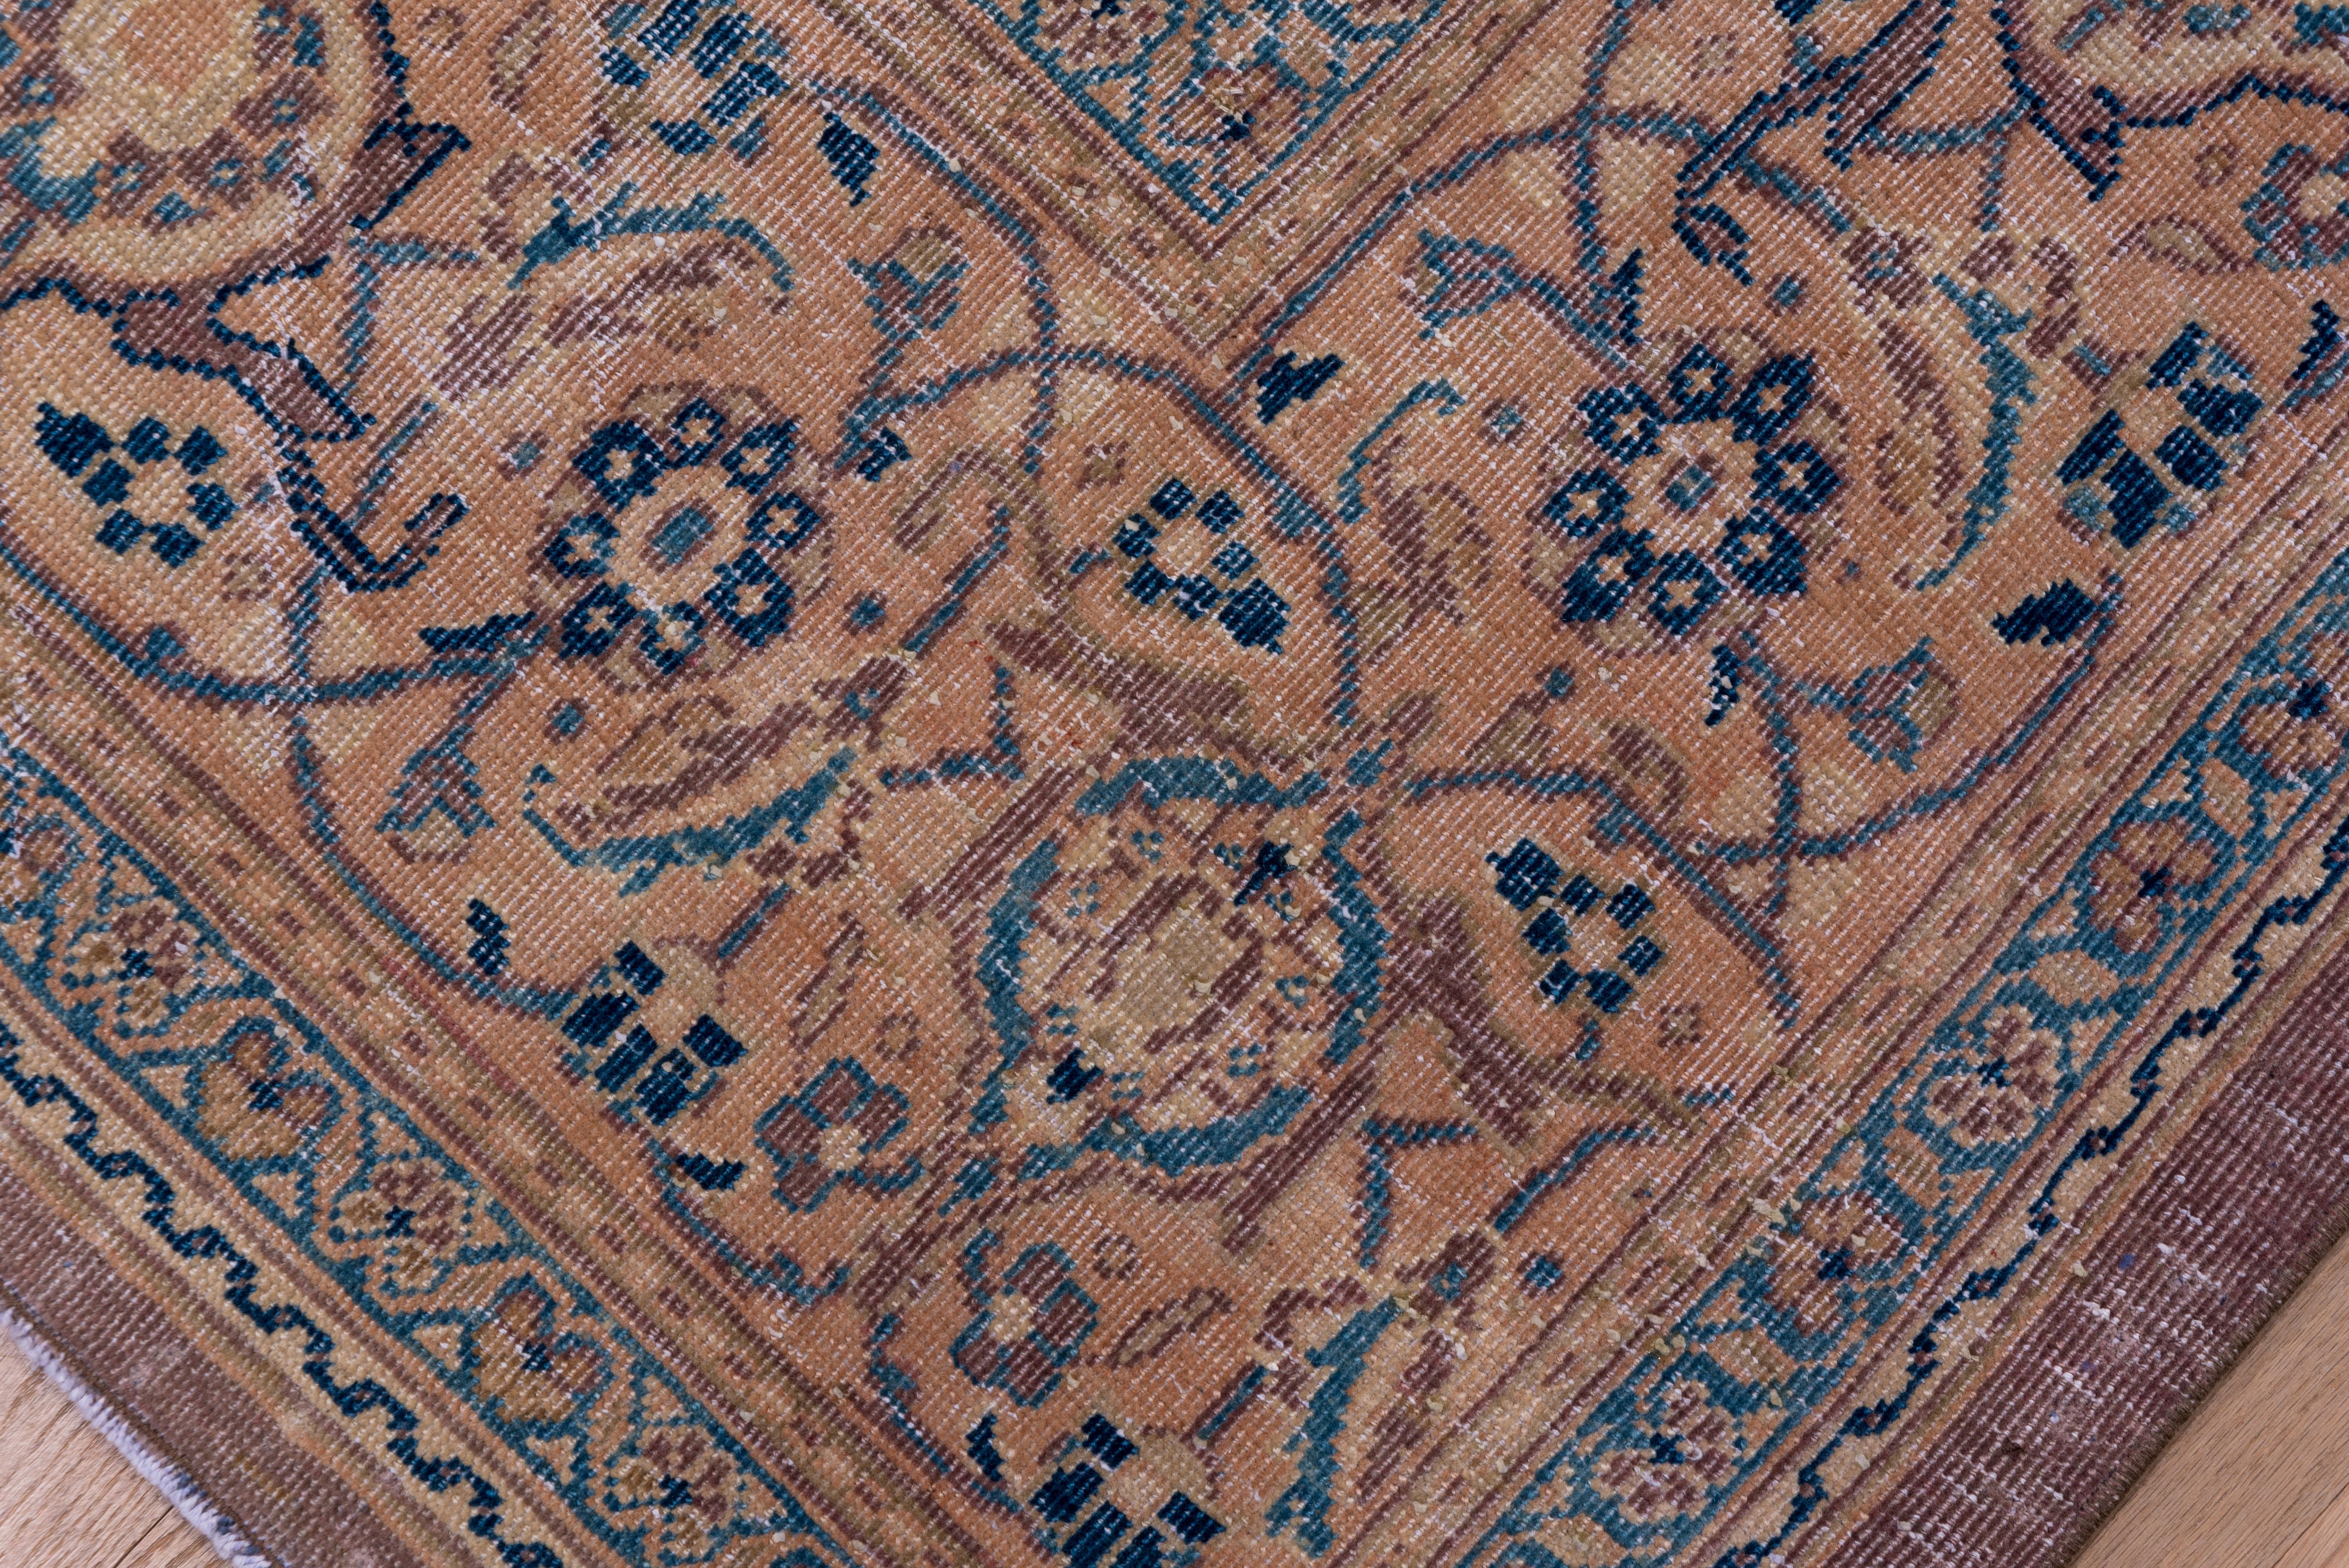 Mahal rugs, also known as Mahal carpets, are a style of hand-woven rugs originating from the Mahallat region of Iran. Mahal carpets are highly regarded for their quality and beauty. They are hand knotted using traditional techniques and typically